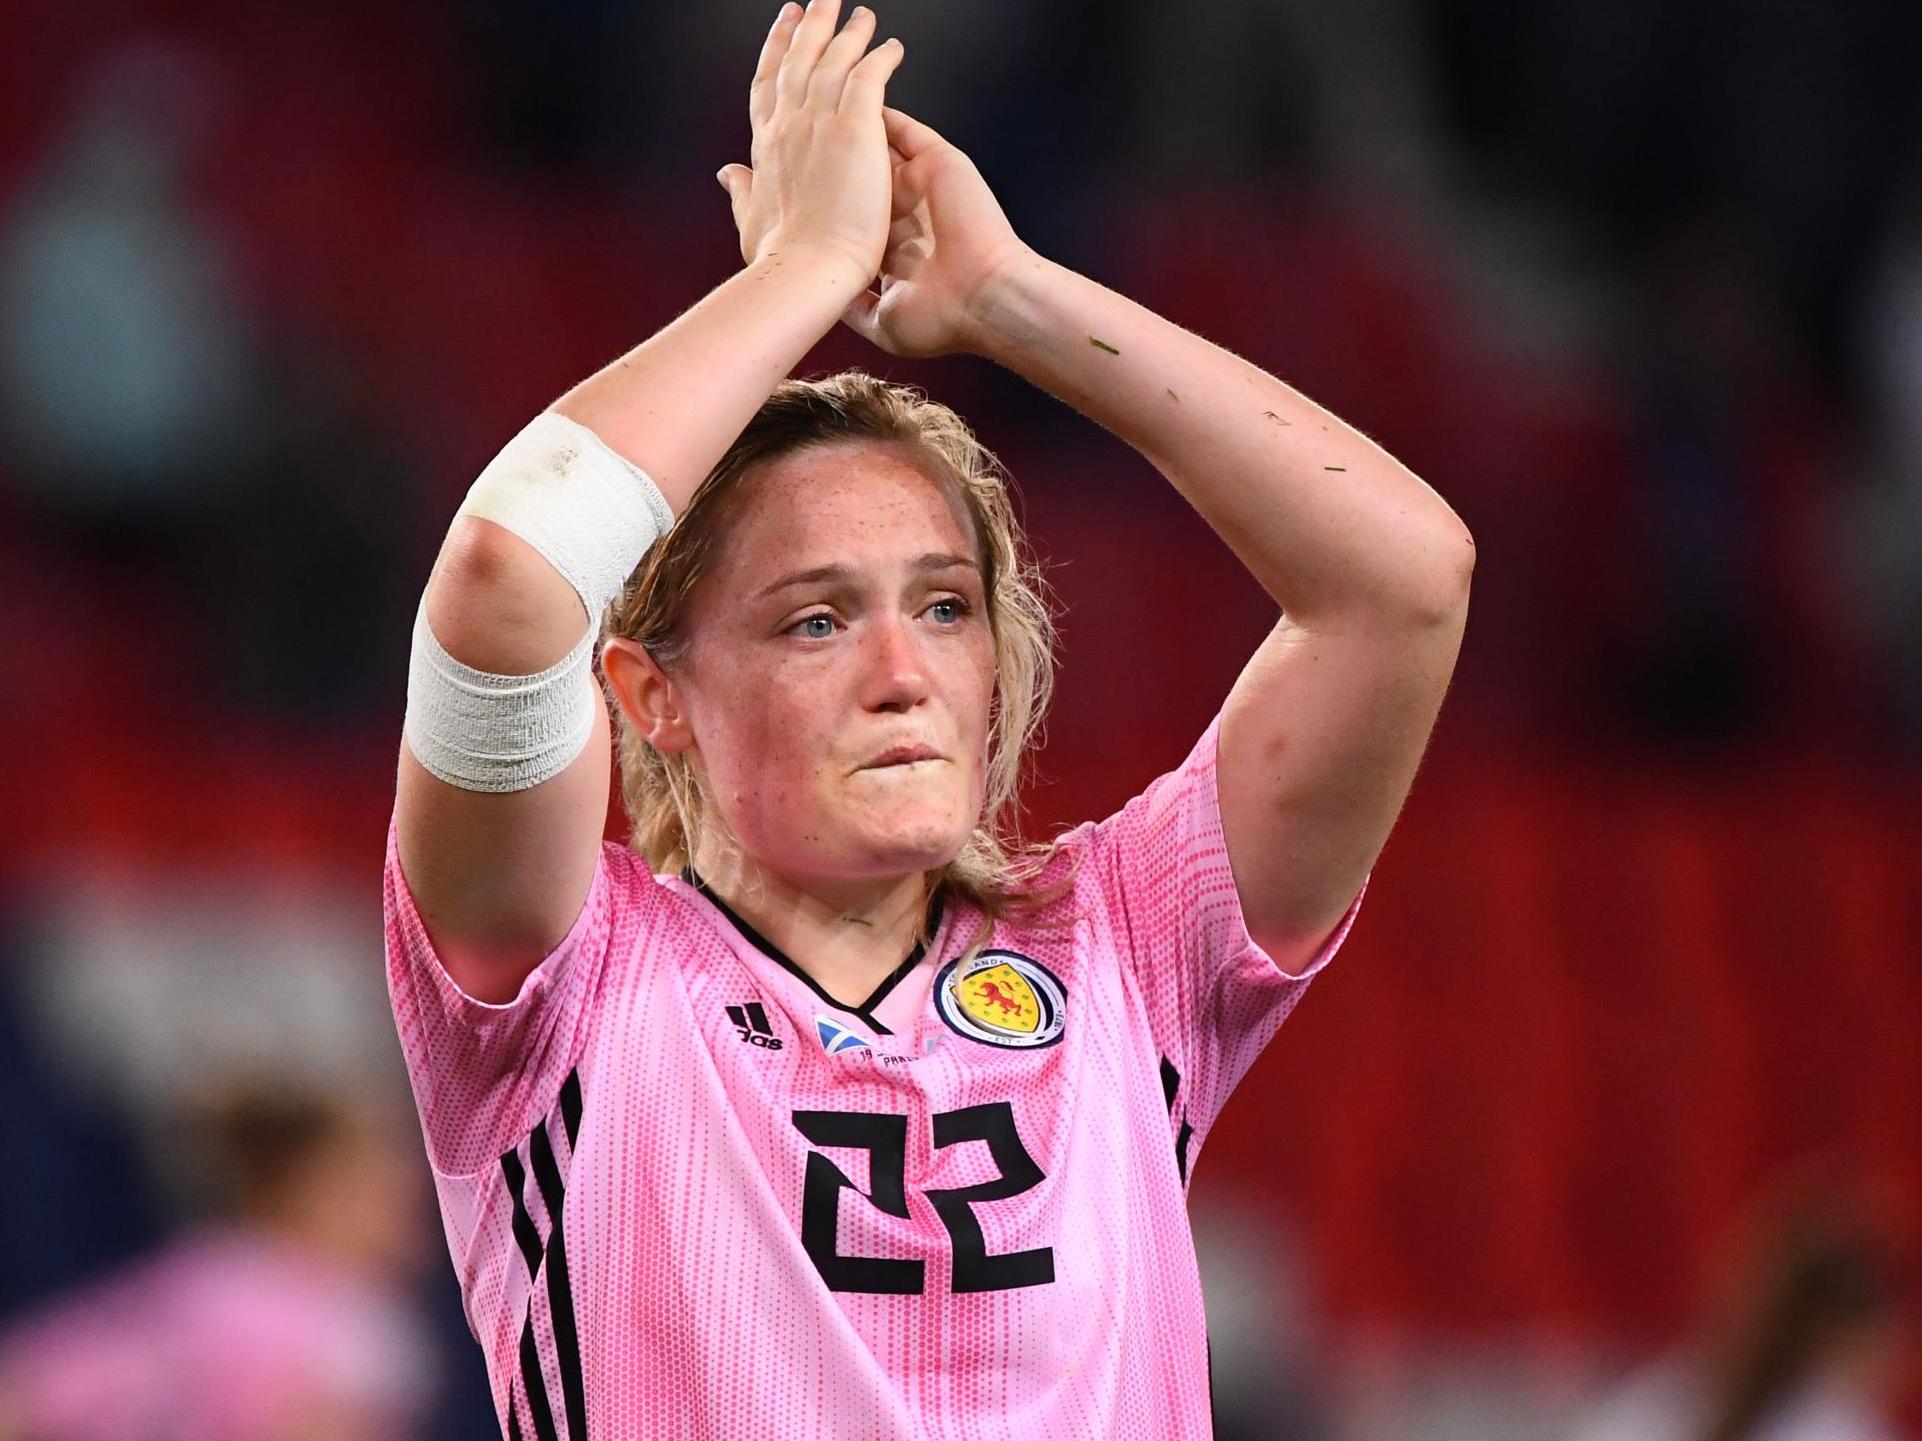 Scotland penalty vs Argentina: Erin Cuthbert in emotional interview after dramatic World Cup exit